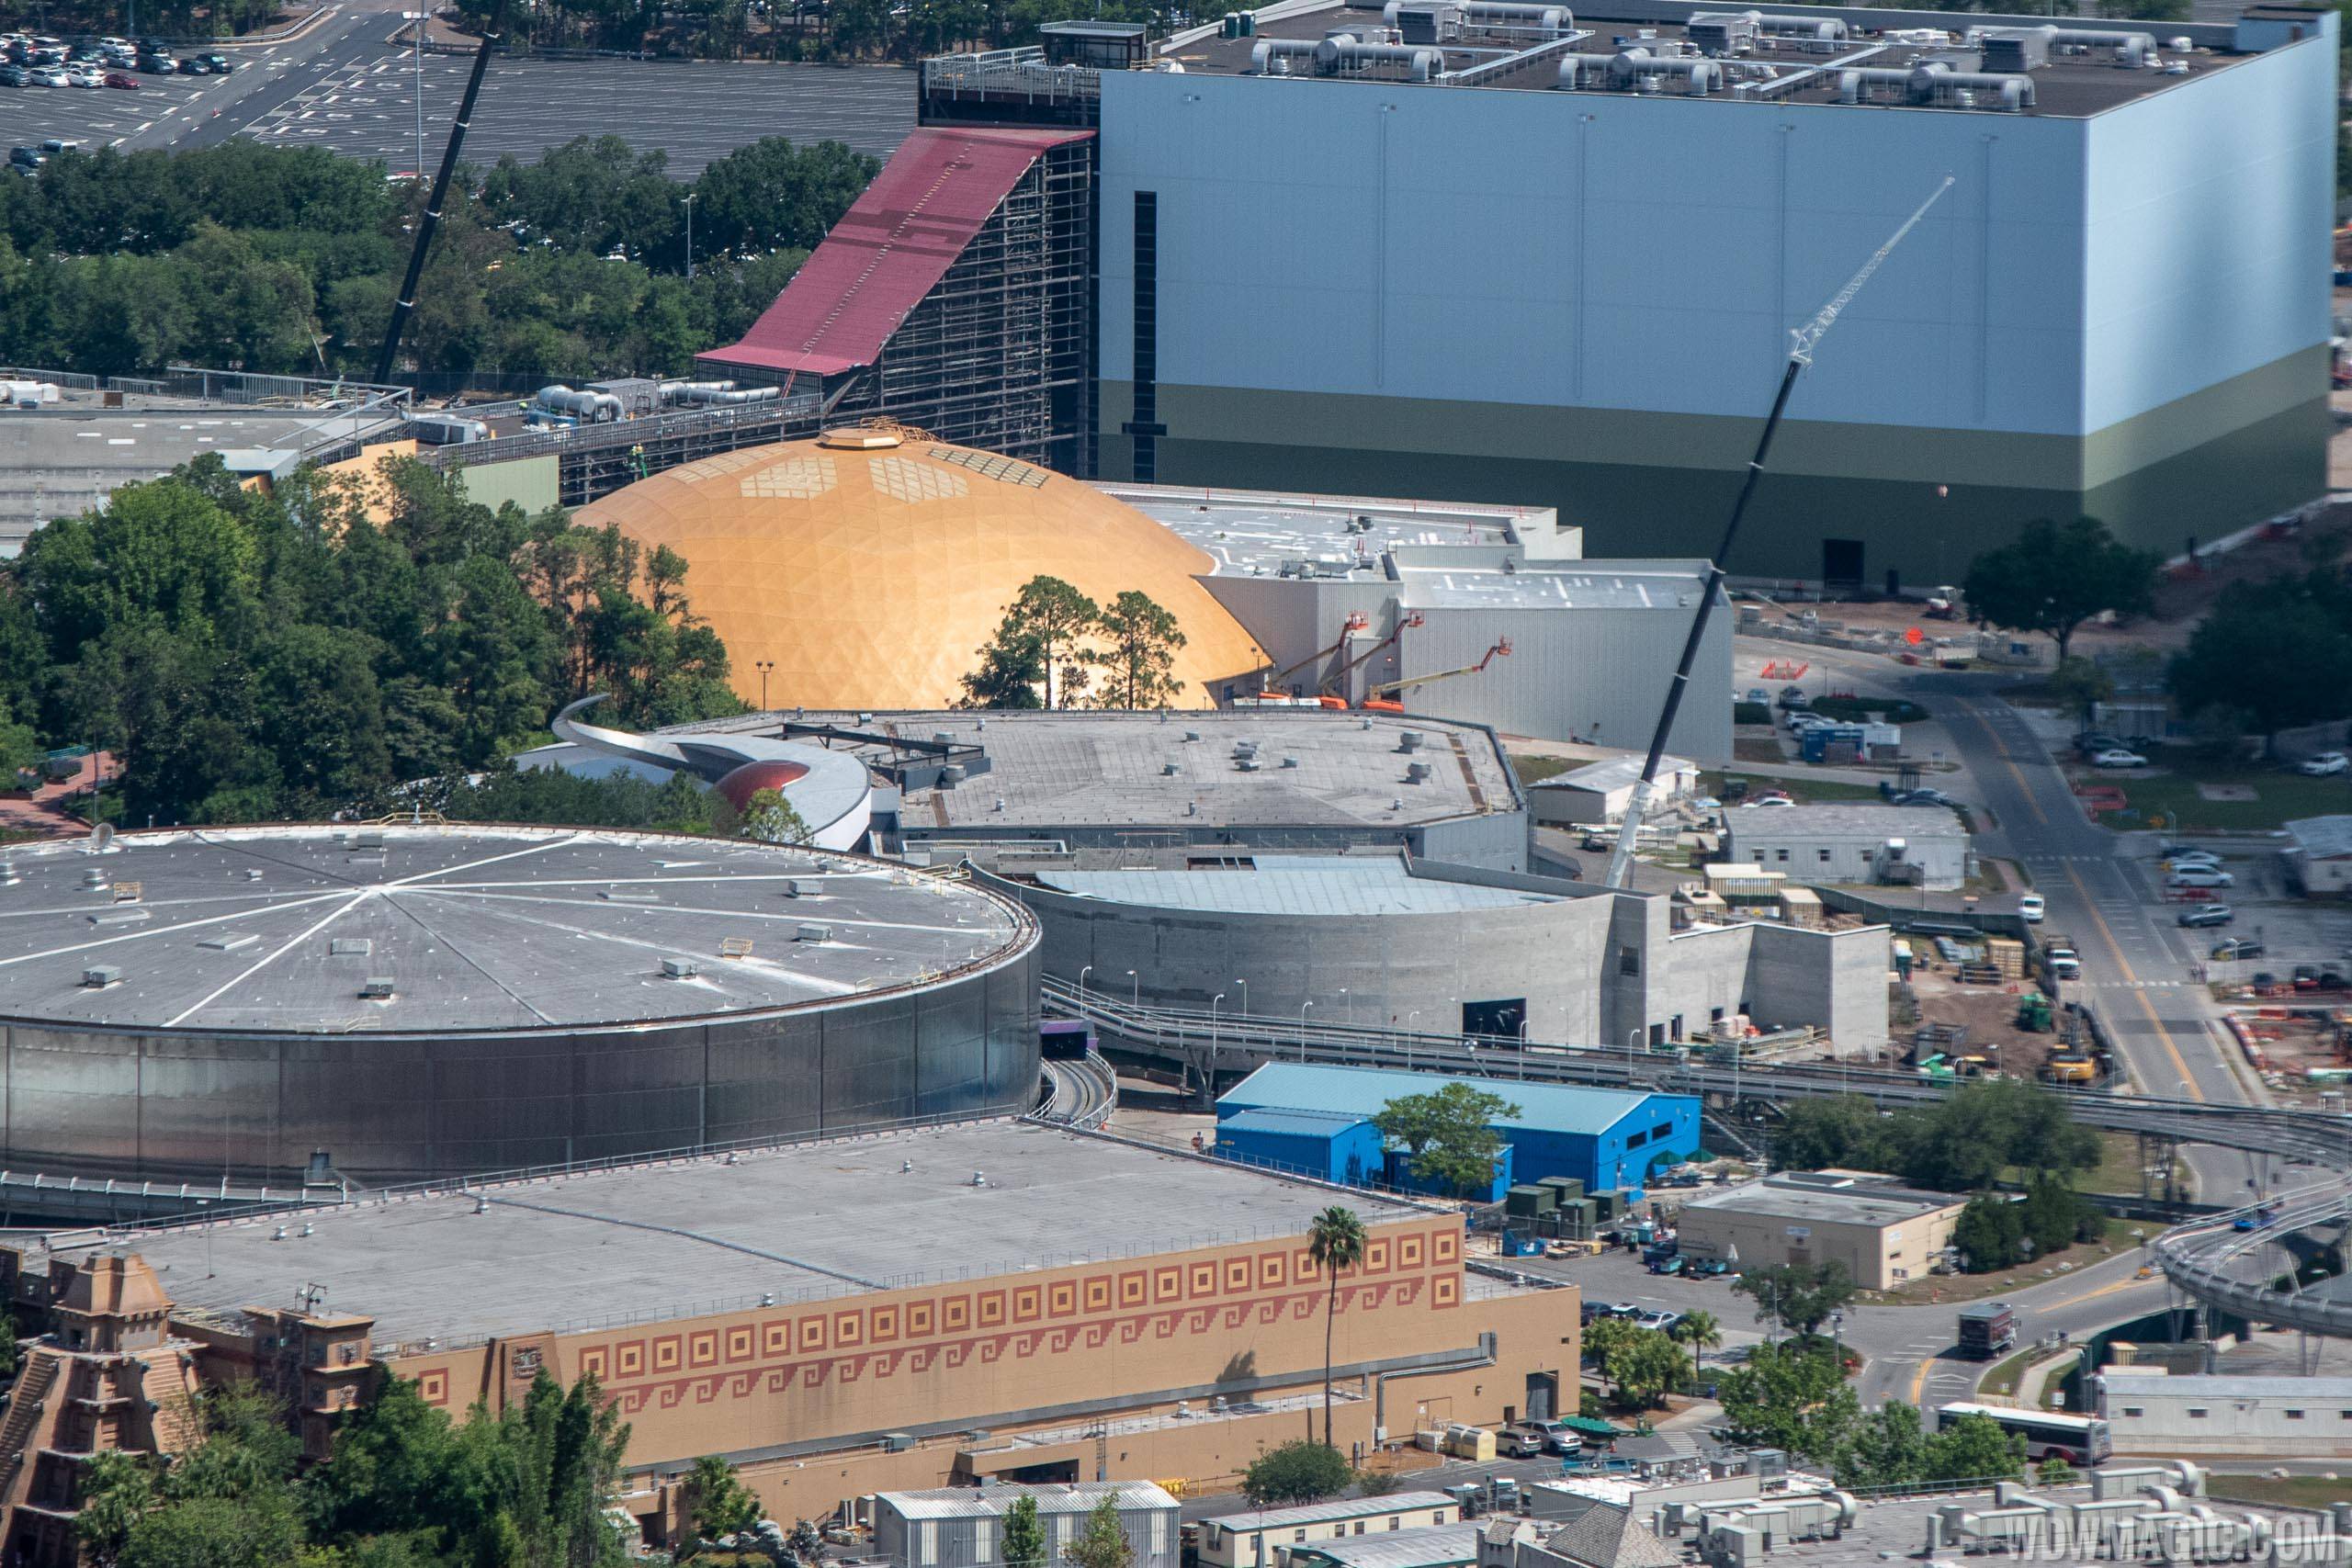 Epcot Space Restaurant construction - May 2019